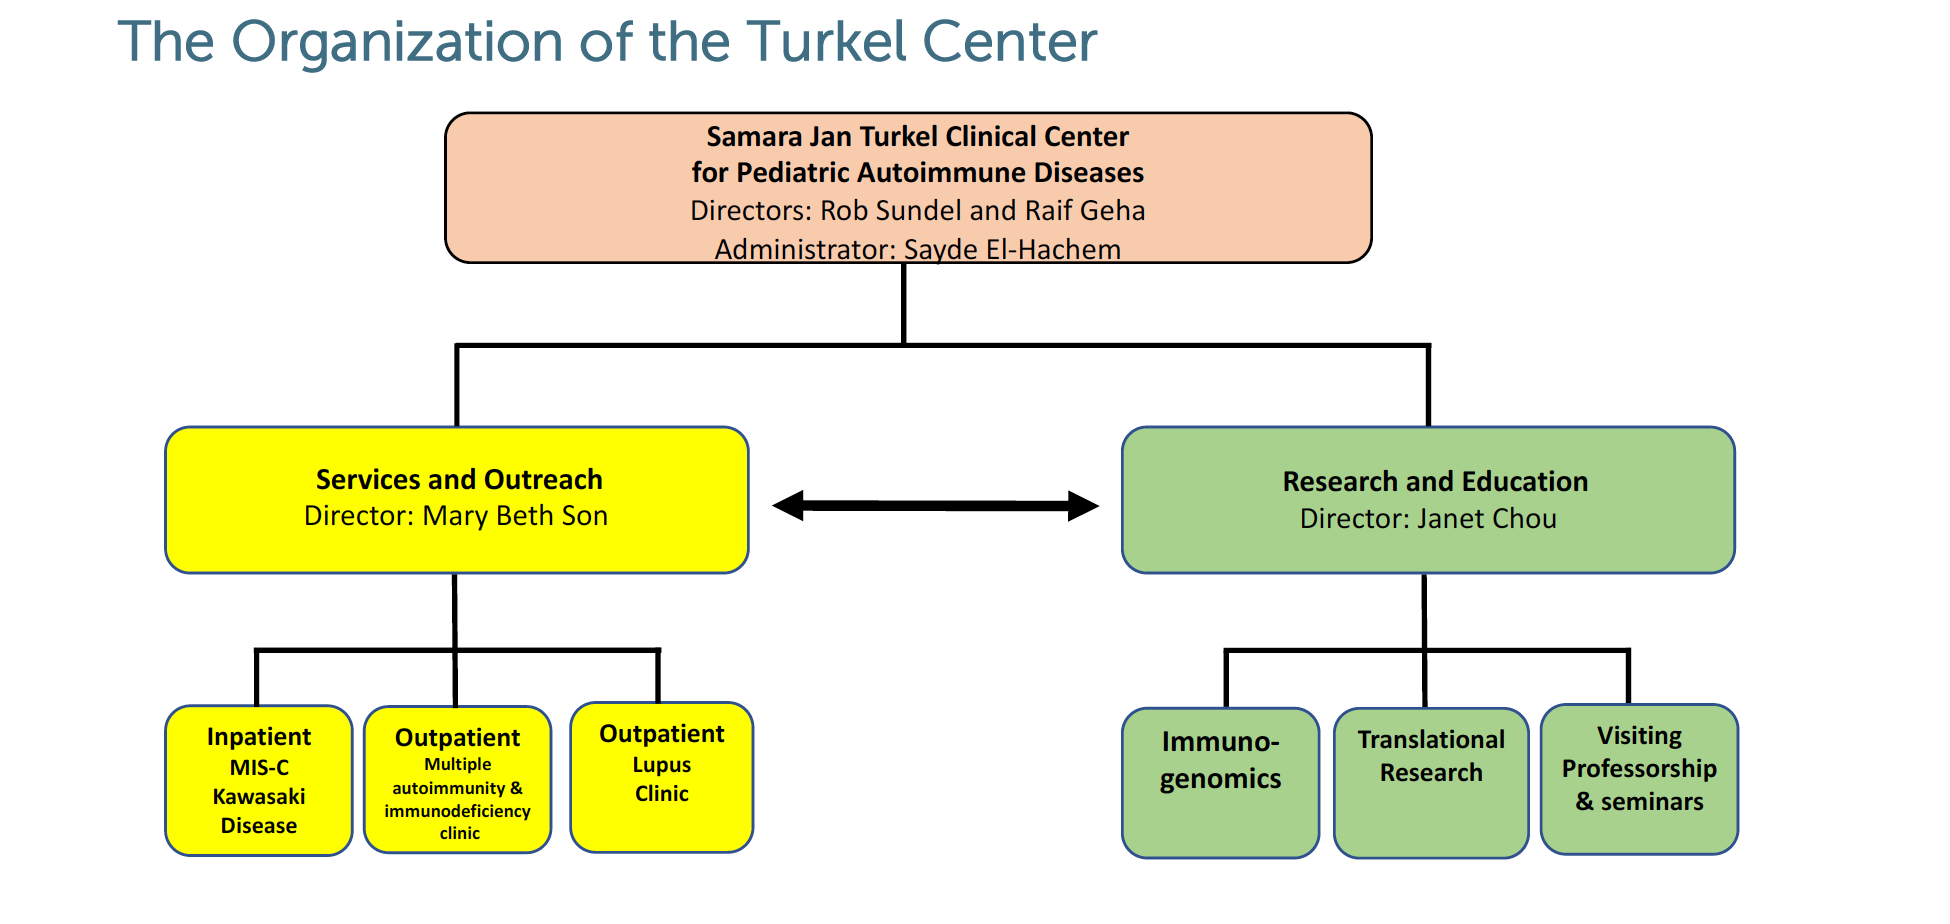 This is the organization of the Turkel Center.